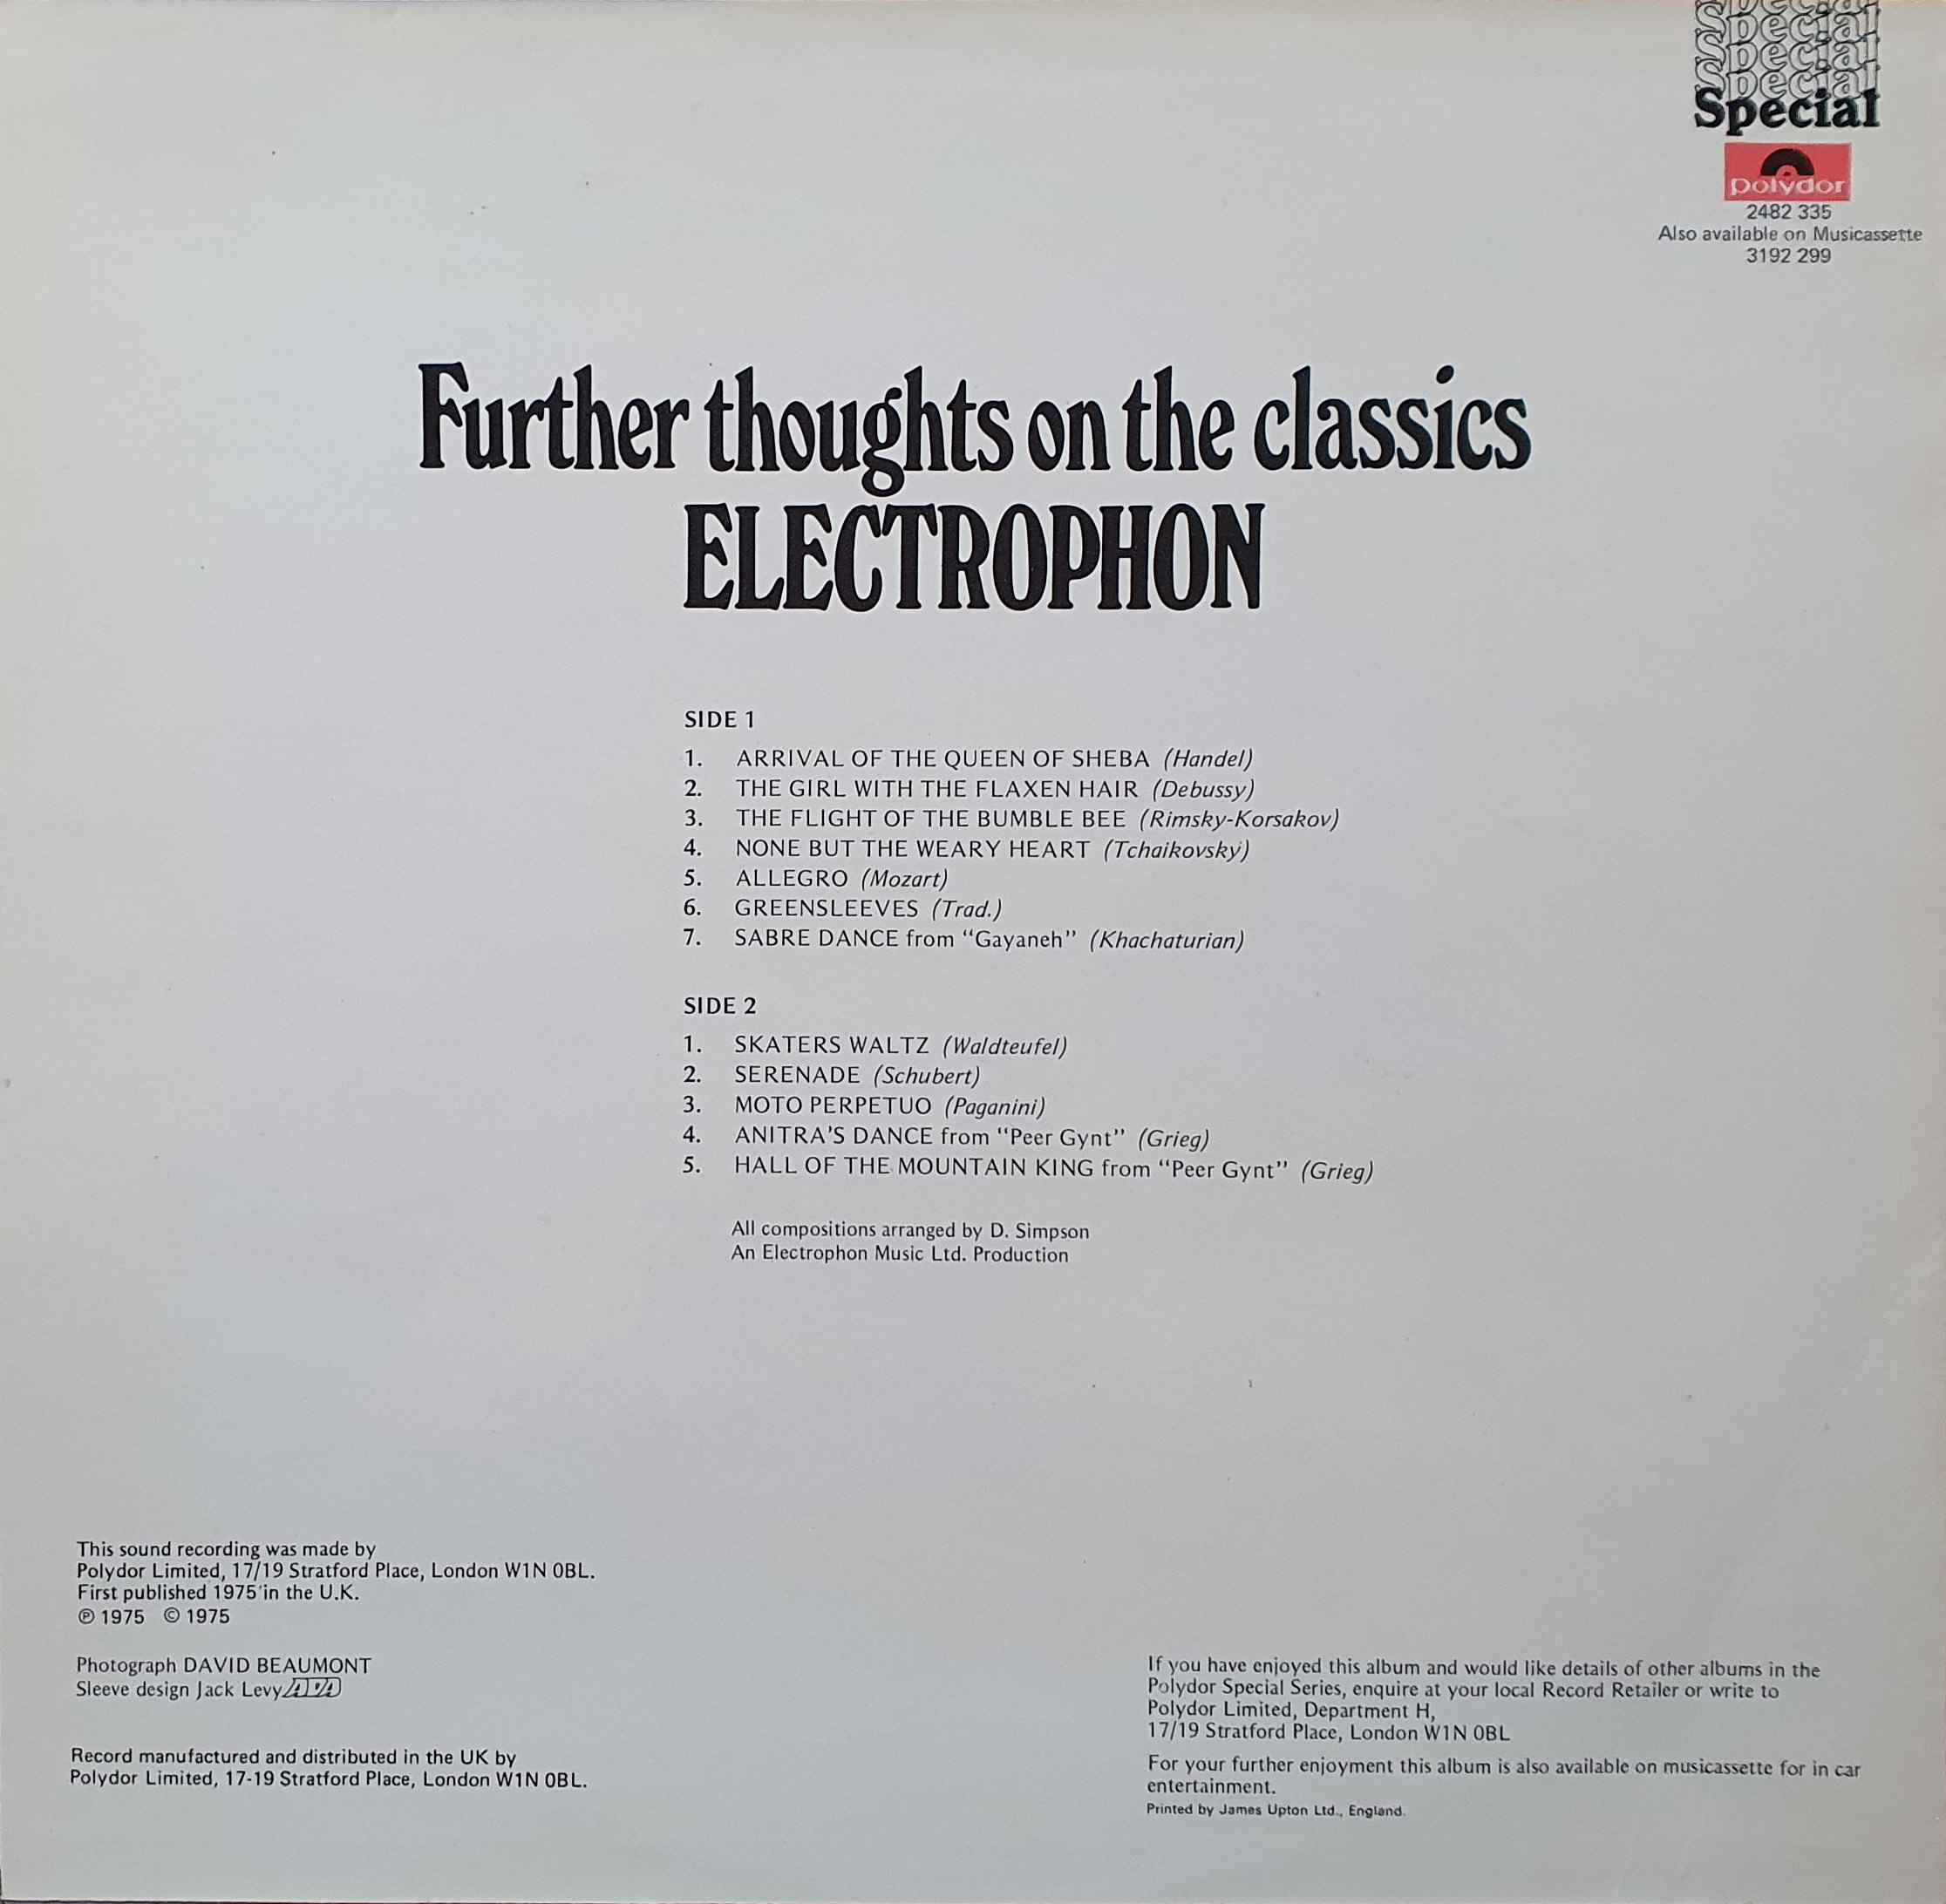 Picture of 2482 - 335 Further thoughts on the classics by artist Arr. Dudley Simpson from the BBC records and Tapes library